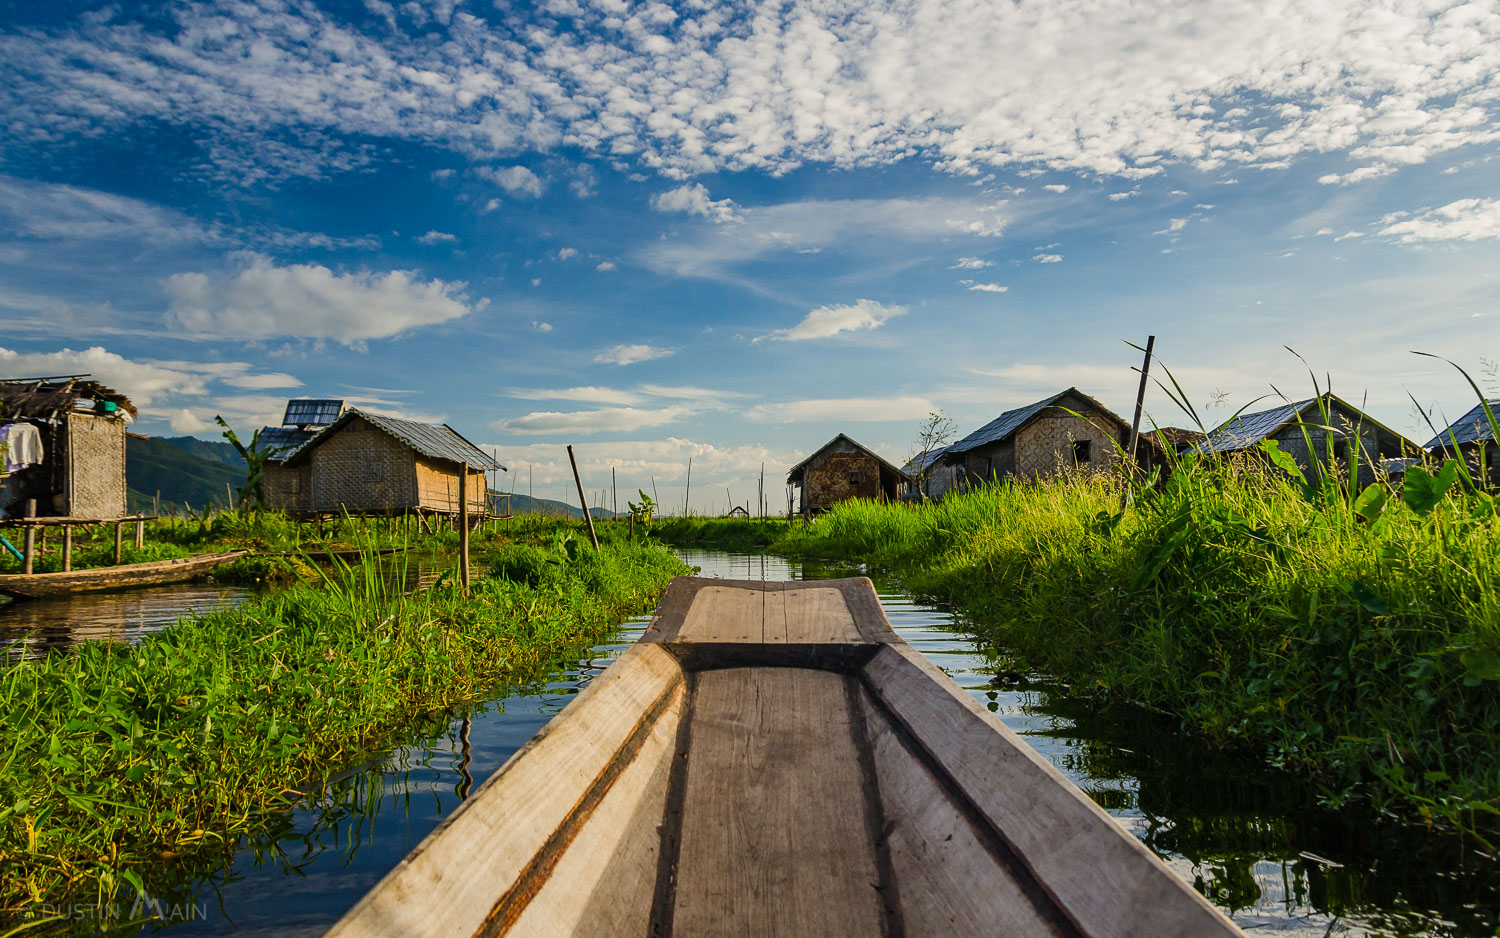   Welcome to your view of   Inle Lake.  